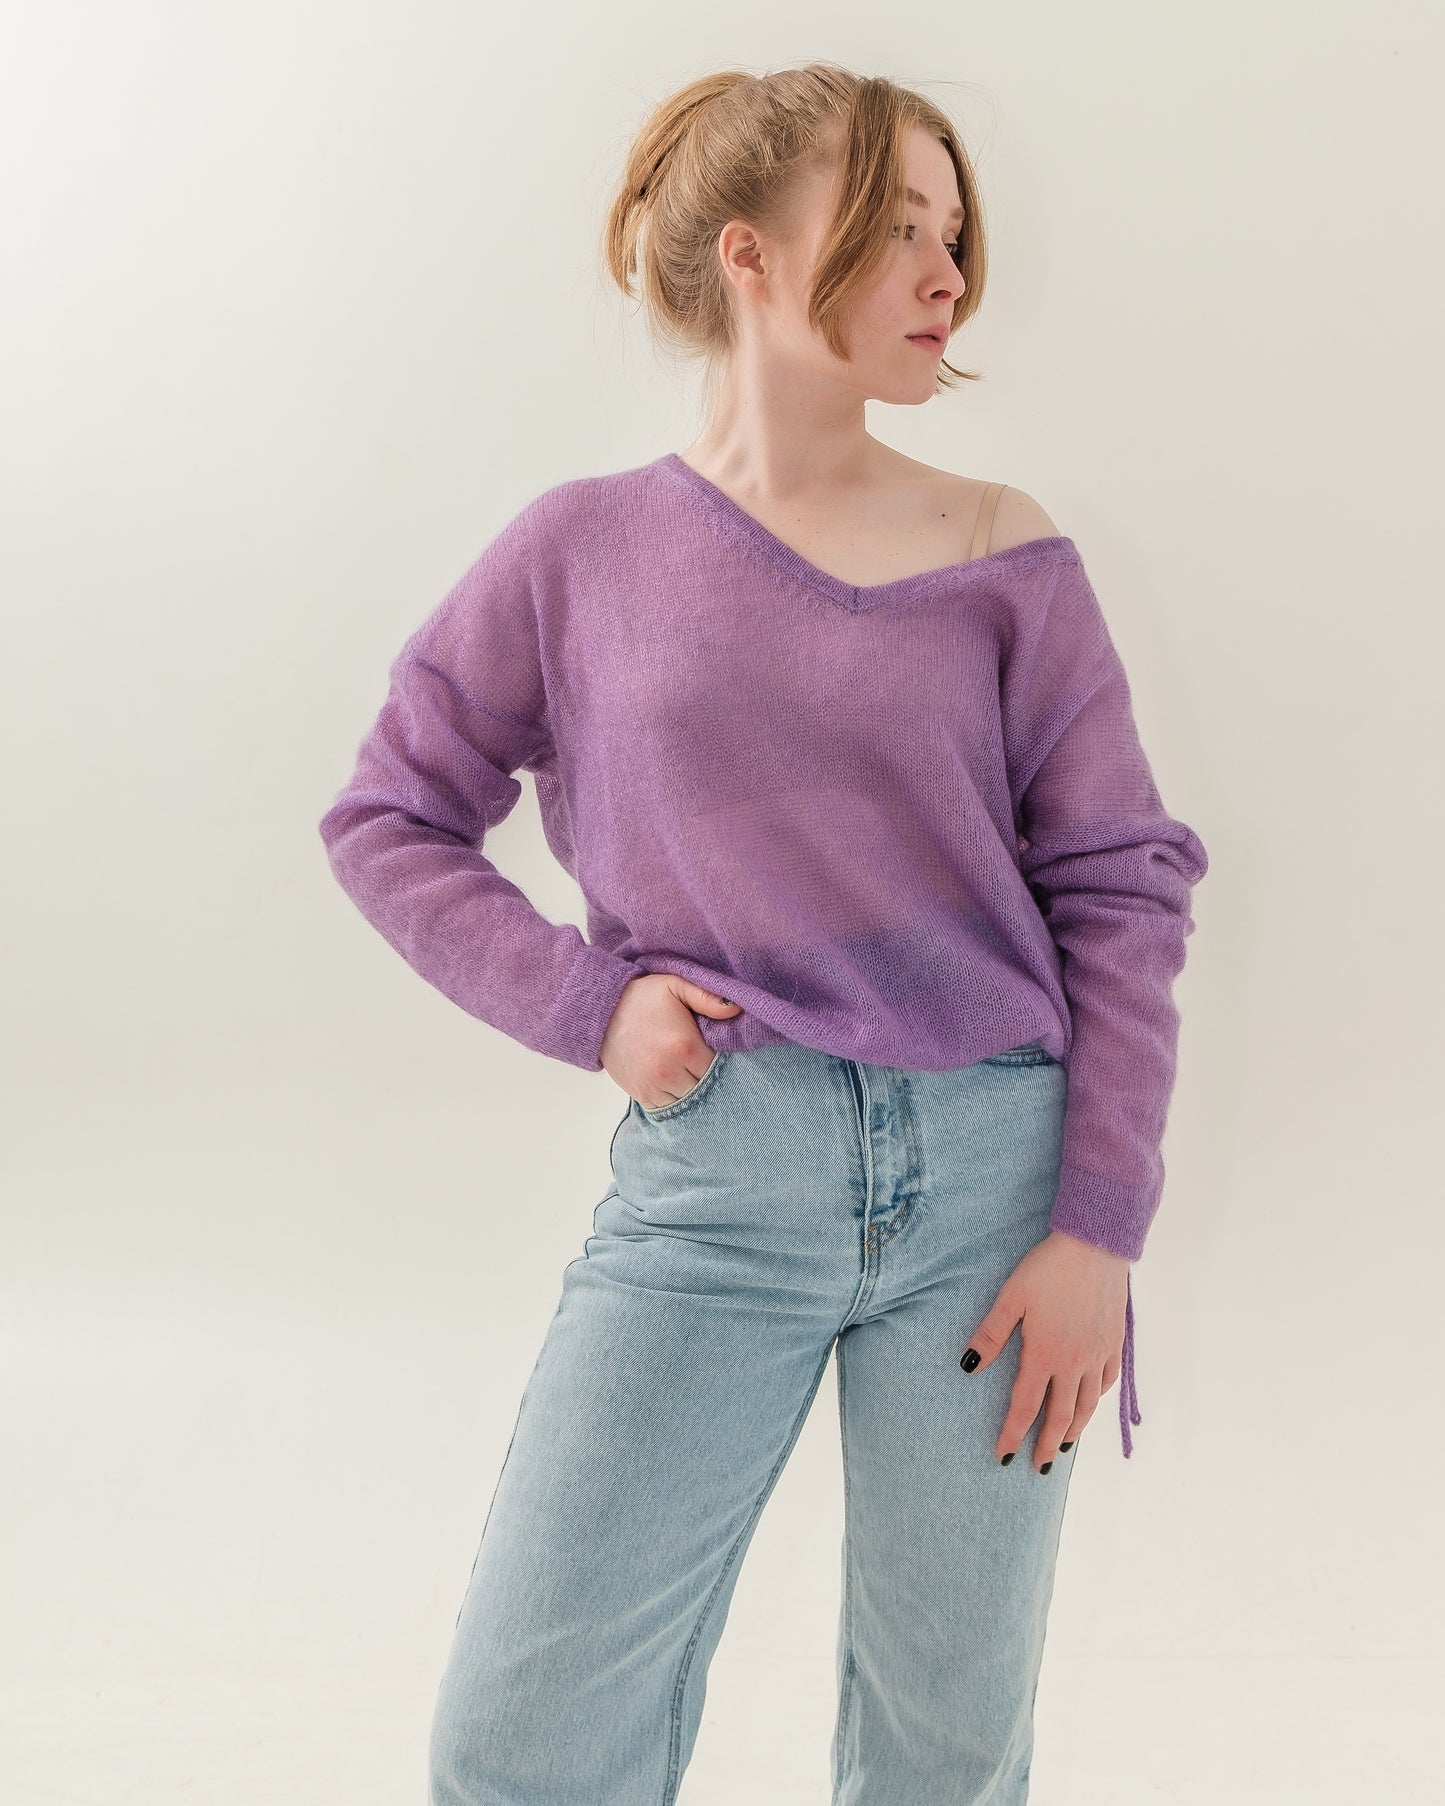 Lightweight sweater in lilac